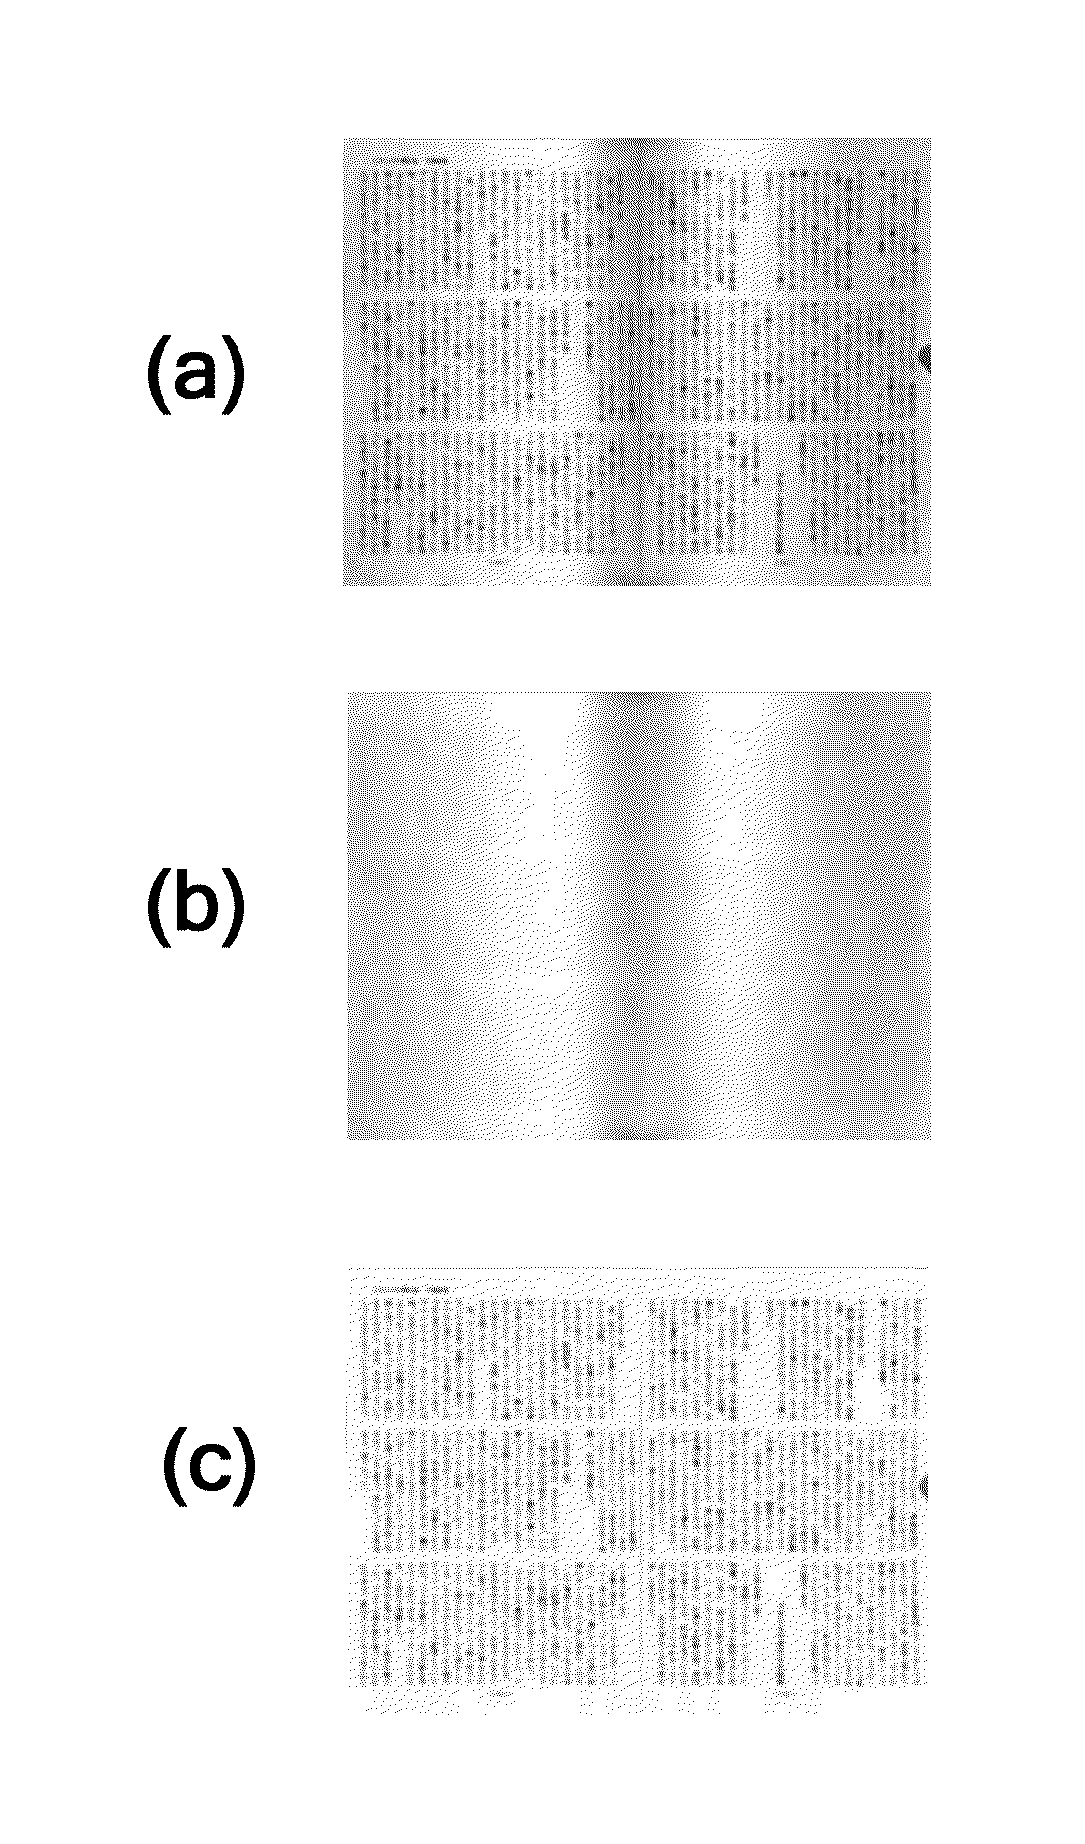 Apparatus for and method of processing document image